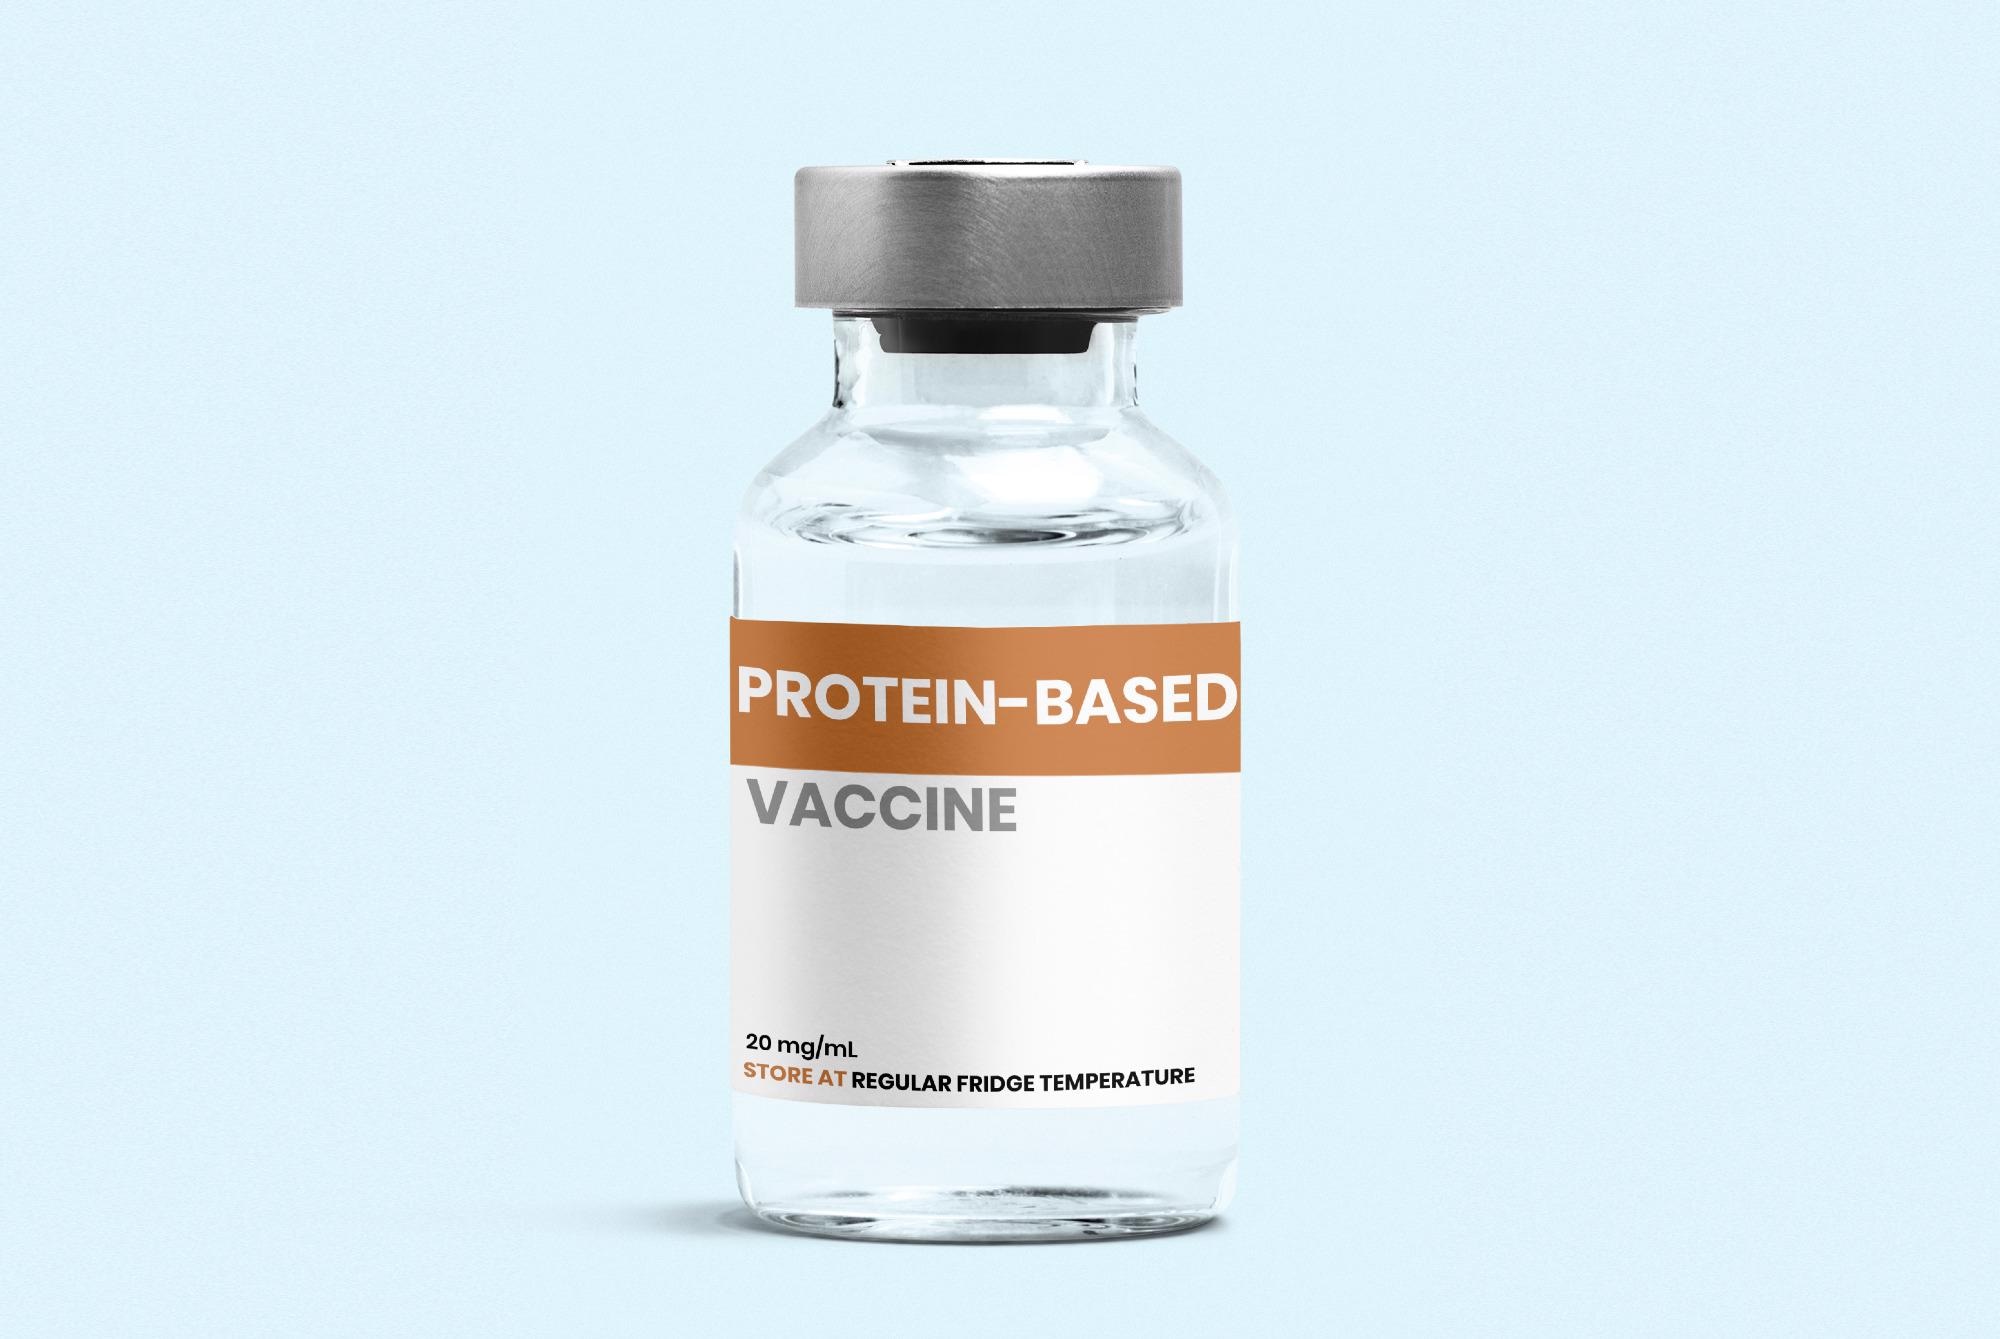 Study: Protein-Based Nanoparticle Vaccines for SARS-CoV-2. Image Credit: Rawpixel.com / Shutterstock.com